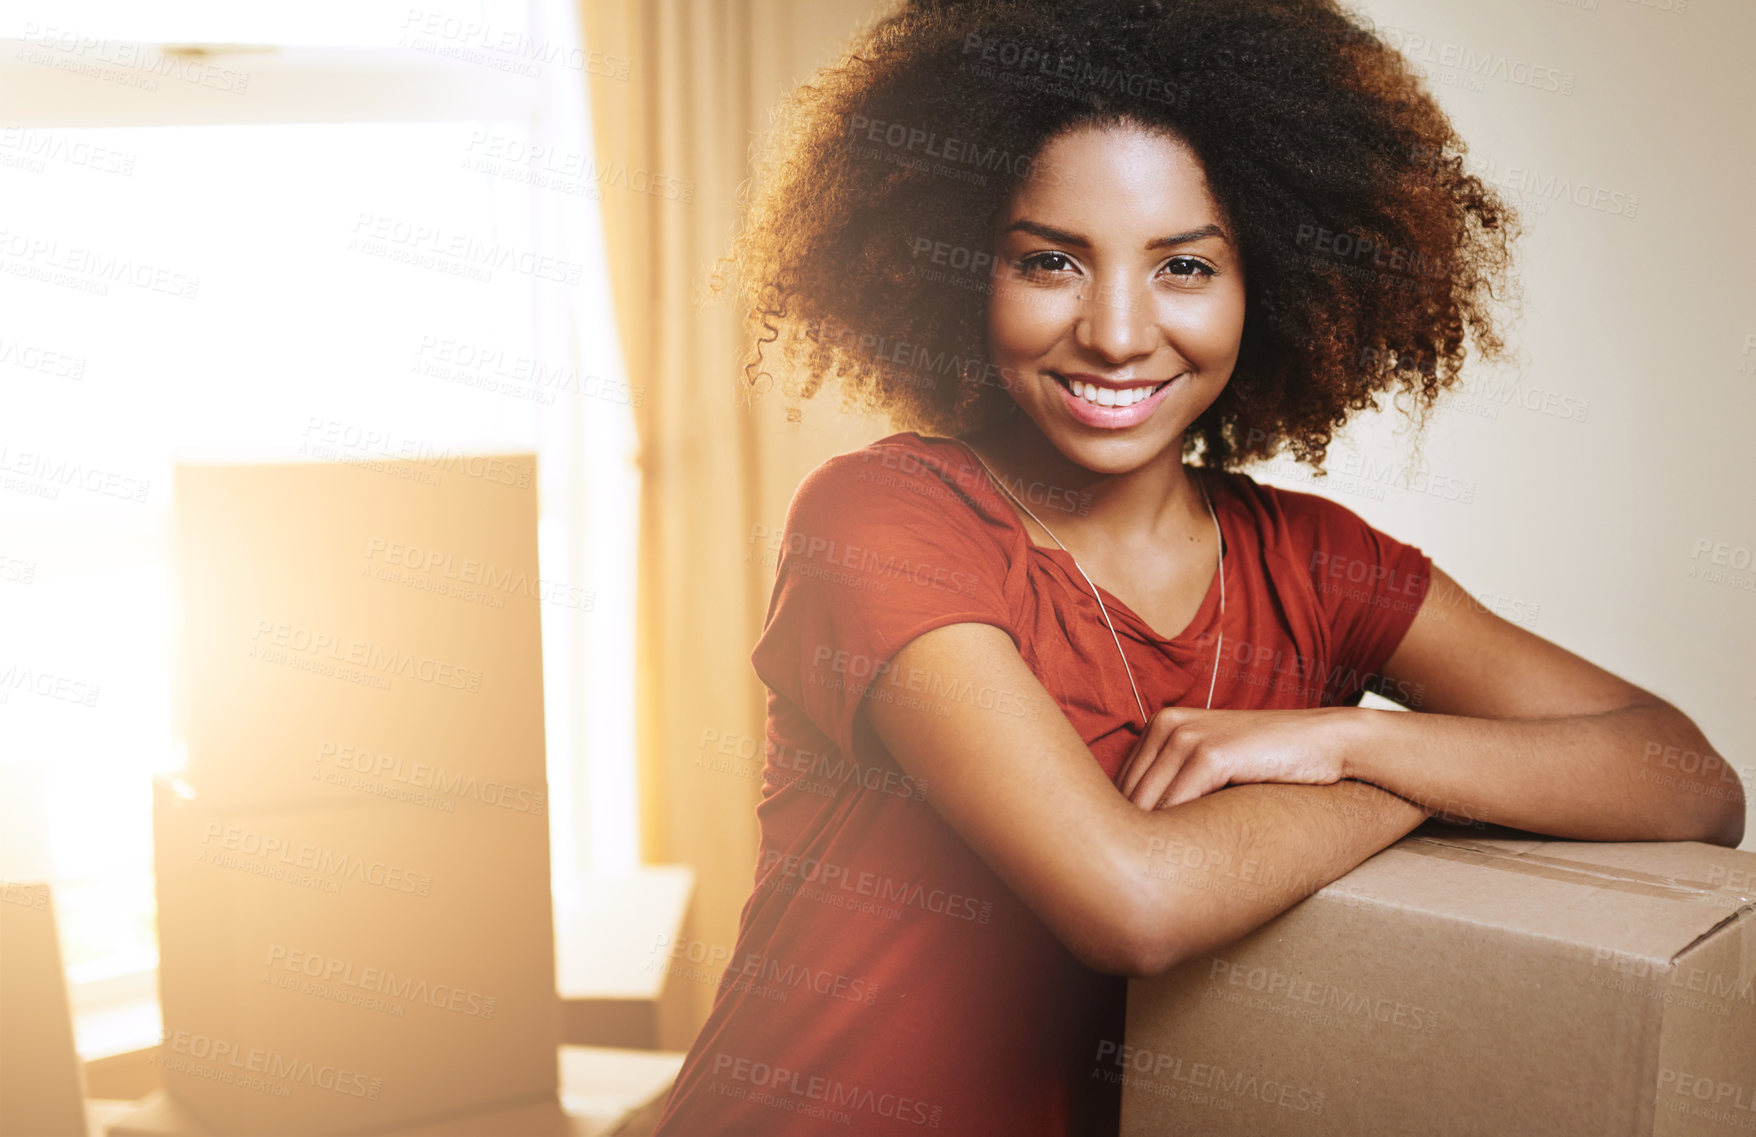 Buy stock photo Portrait of a young woman moving into her new home